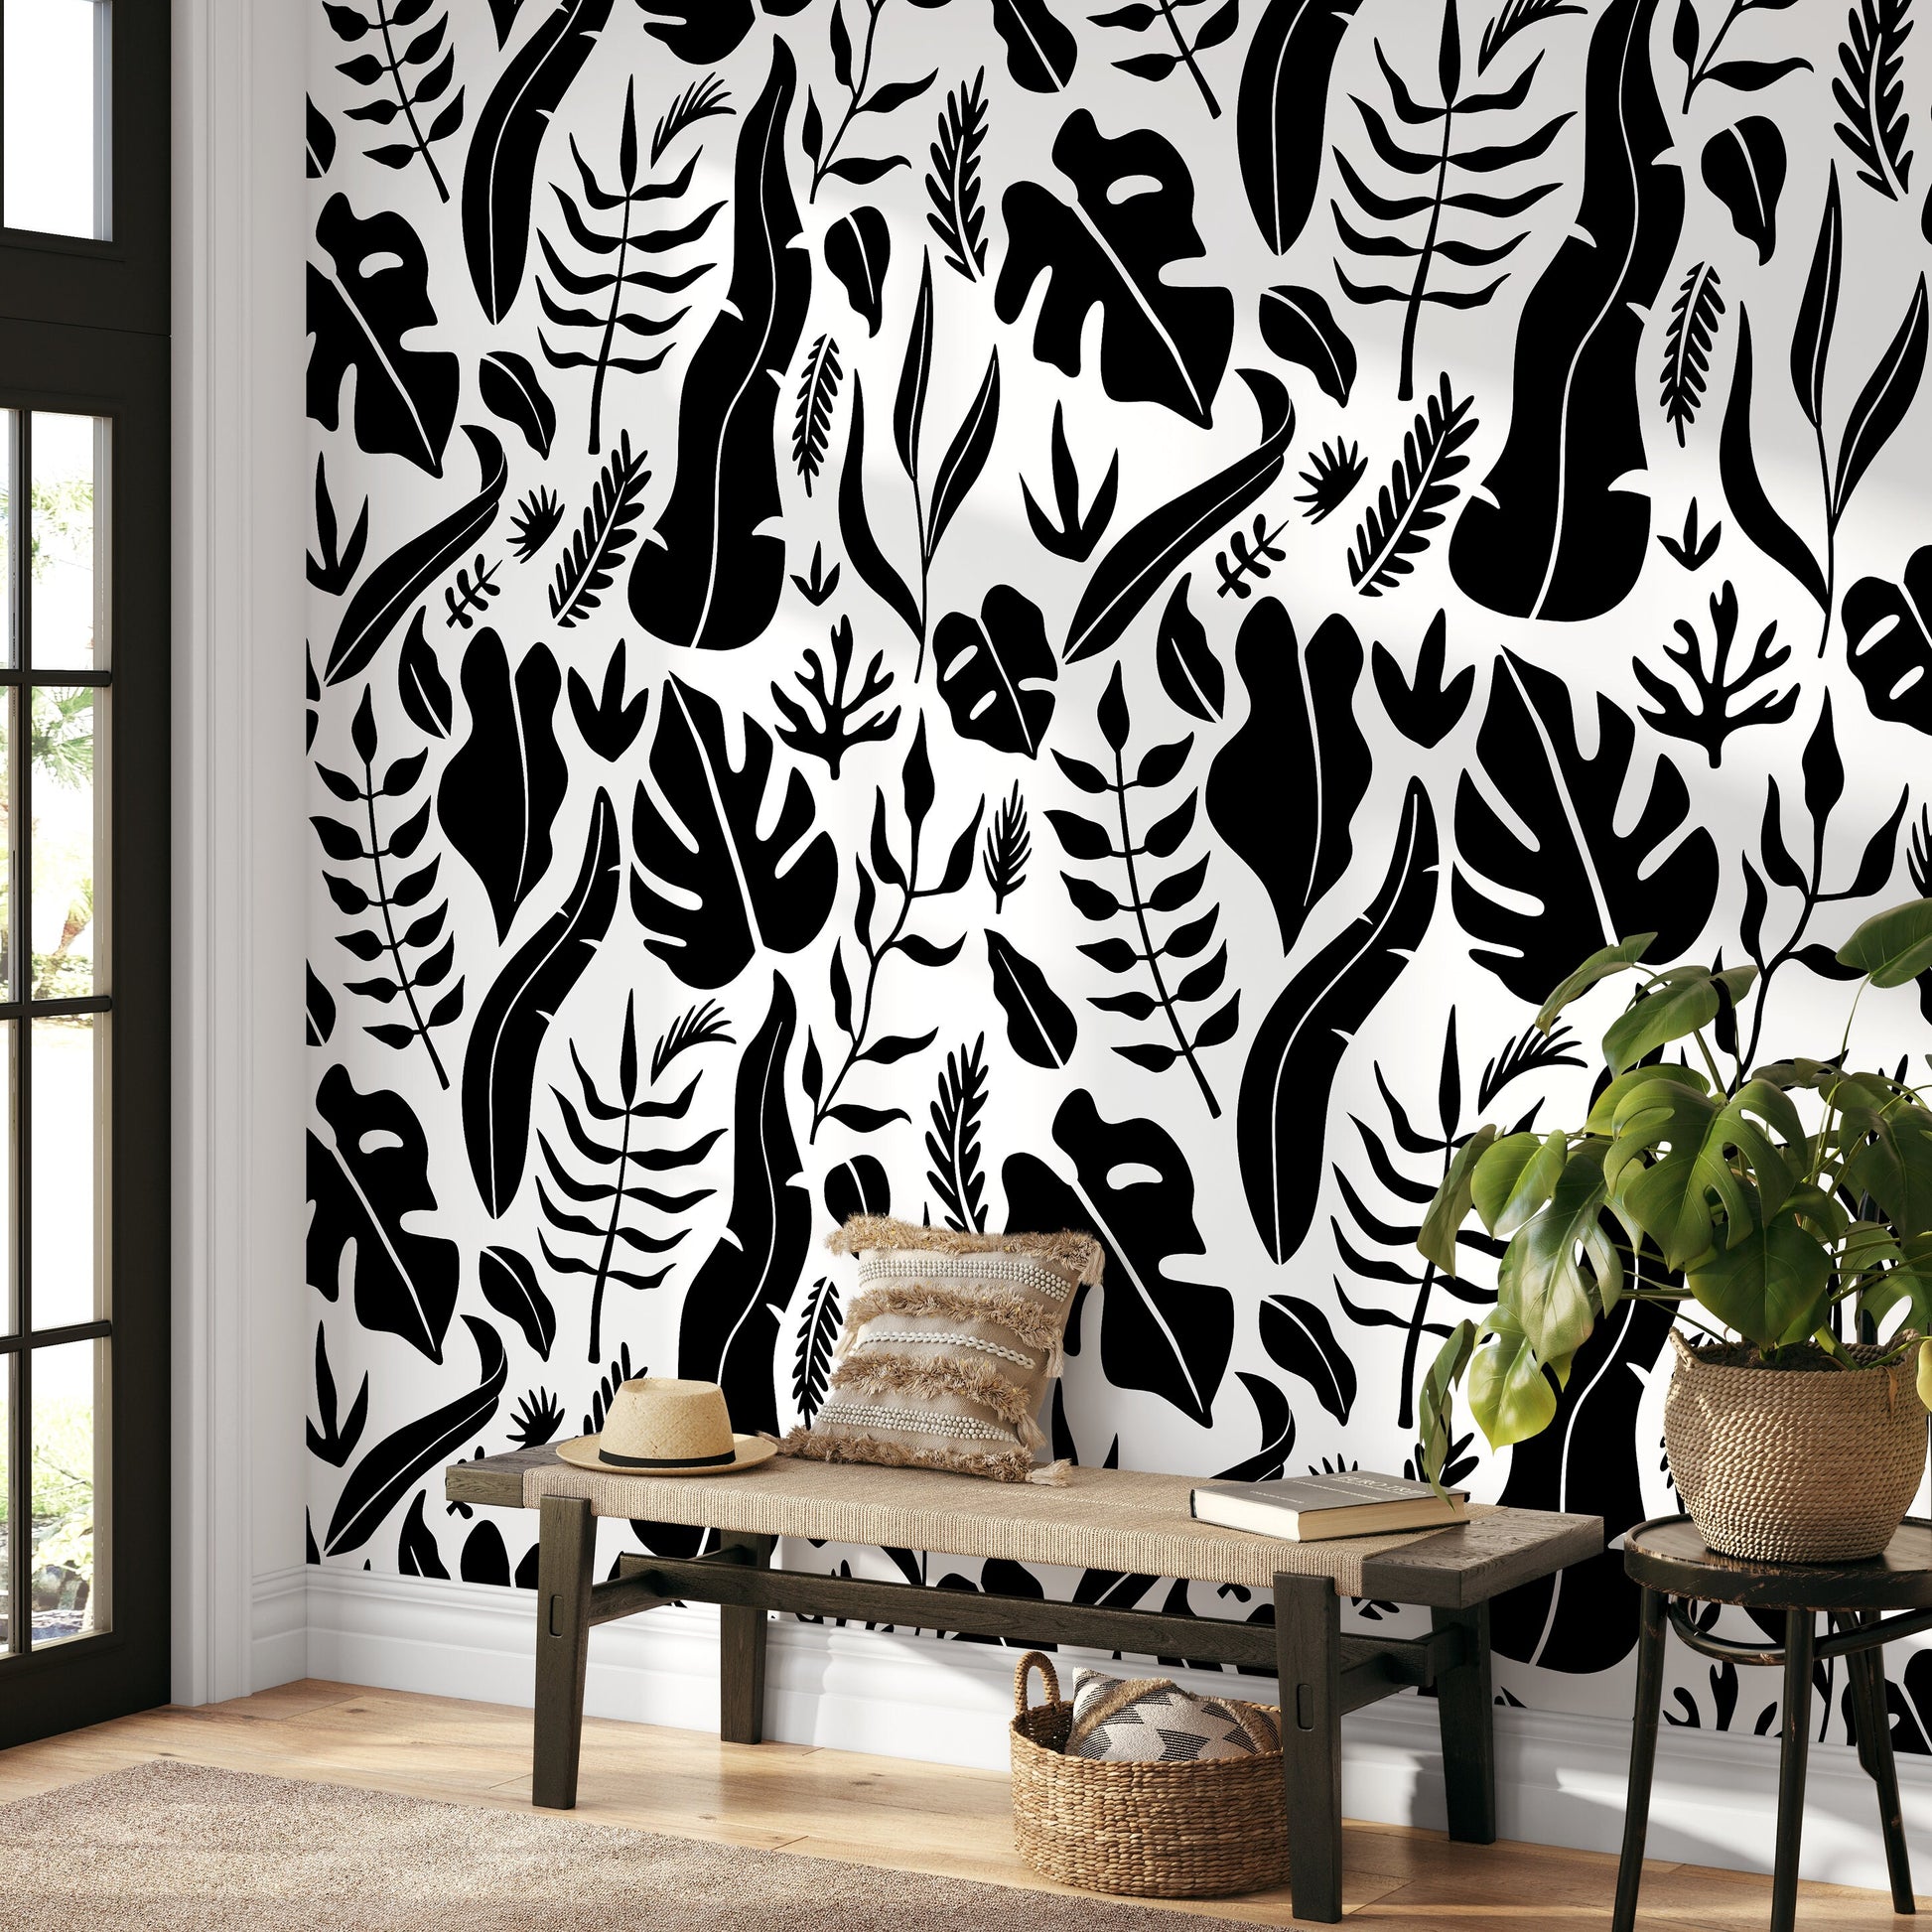 Removable Wallpaper, Tropical Leaves, Temporary Wallpaper, Spring Pattern, Wall Paper Removable, Wallpaper - C261